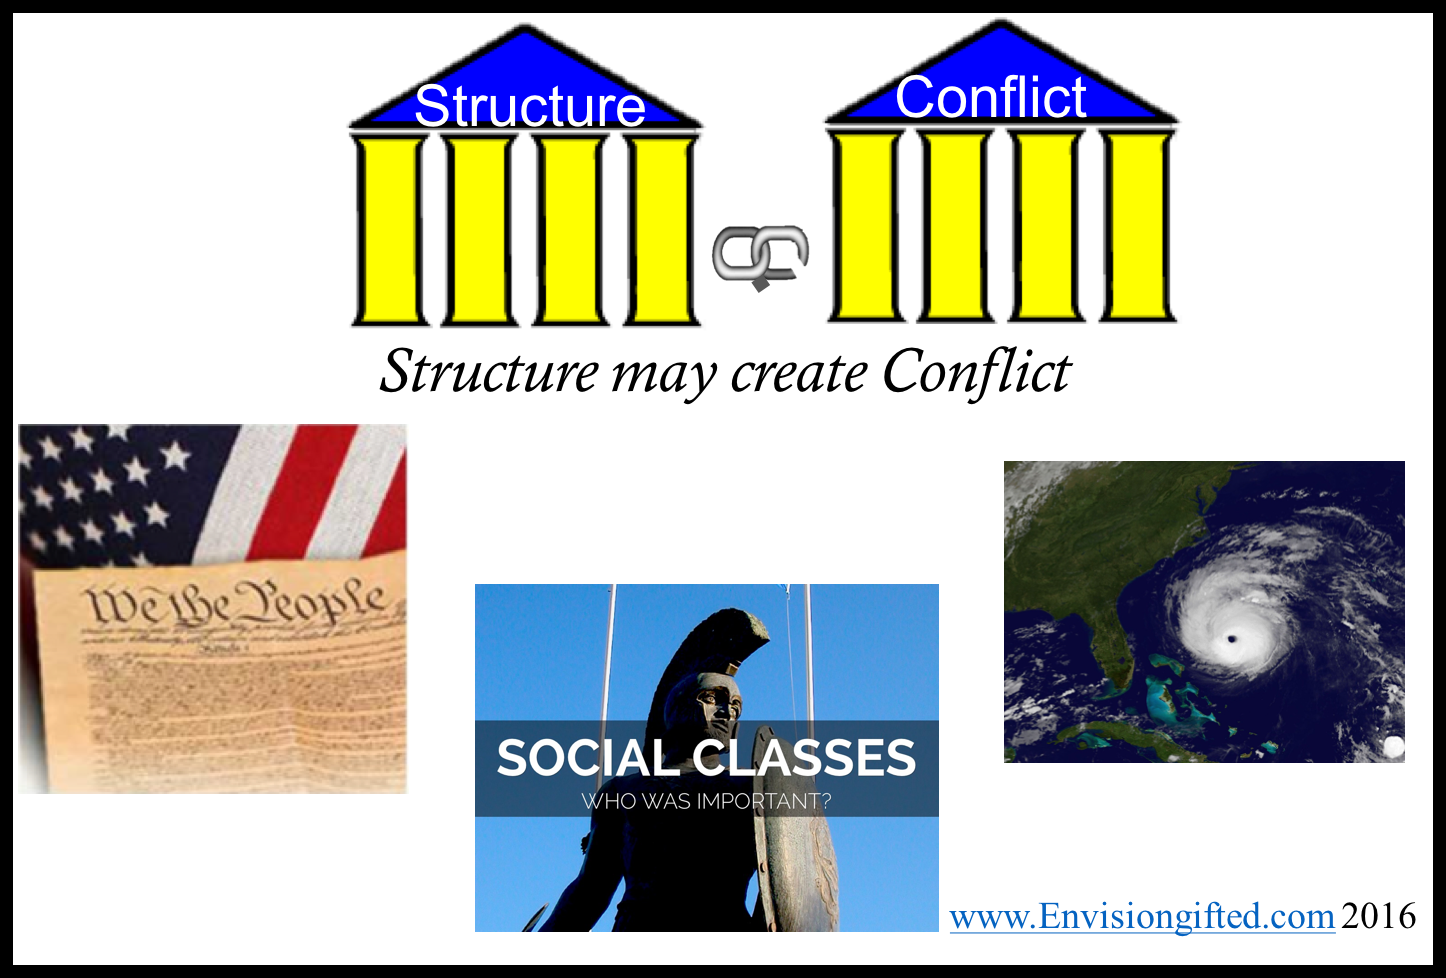 Envision Gifted. Universal Theme Structure May Create Conflict